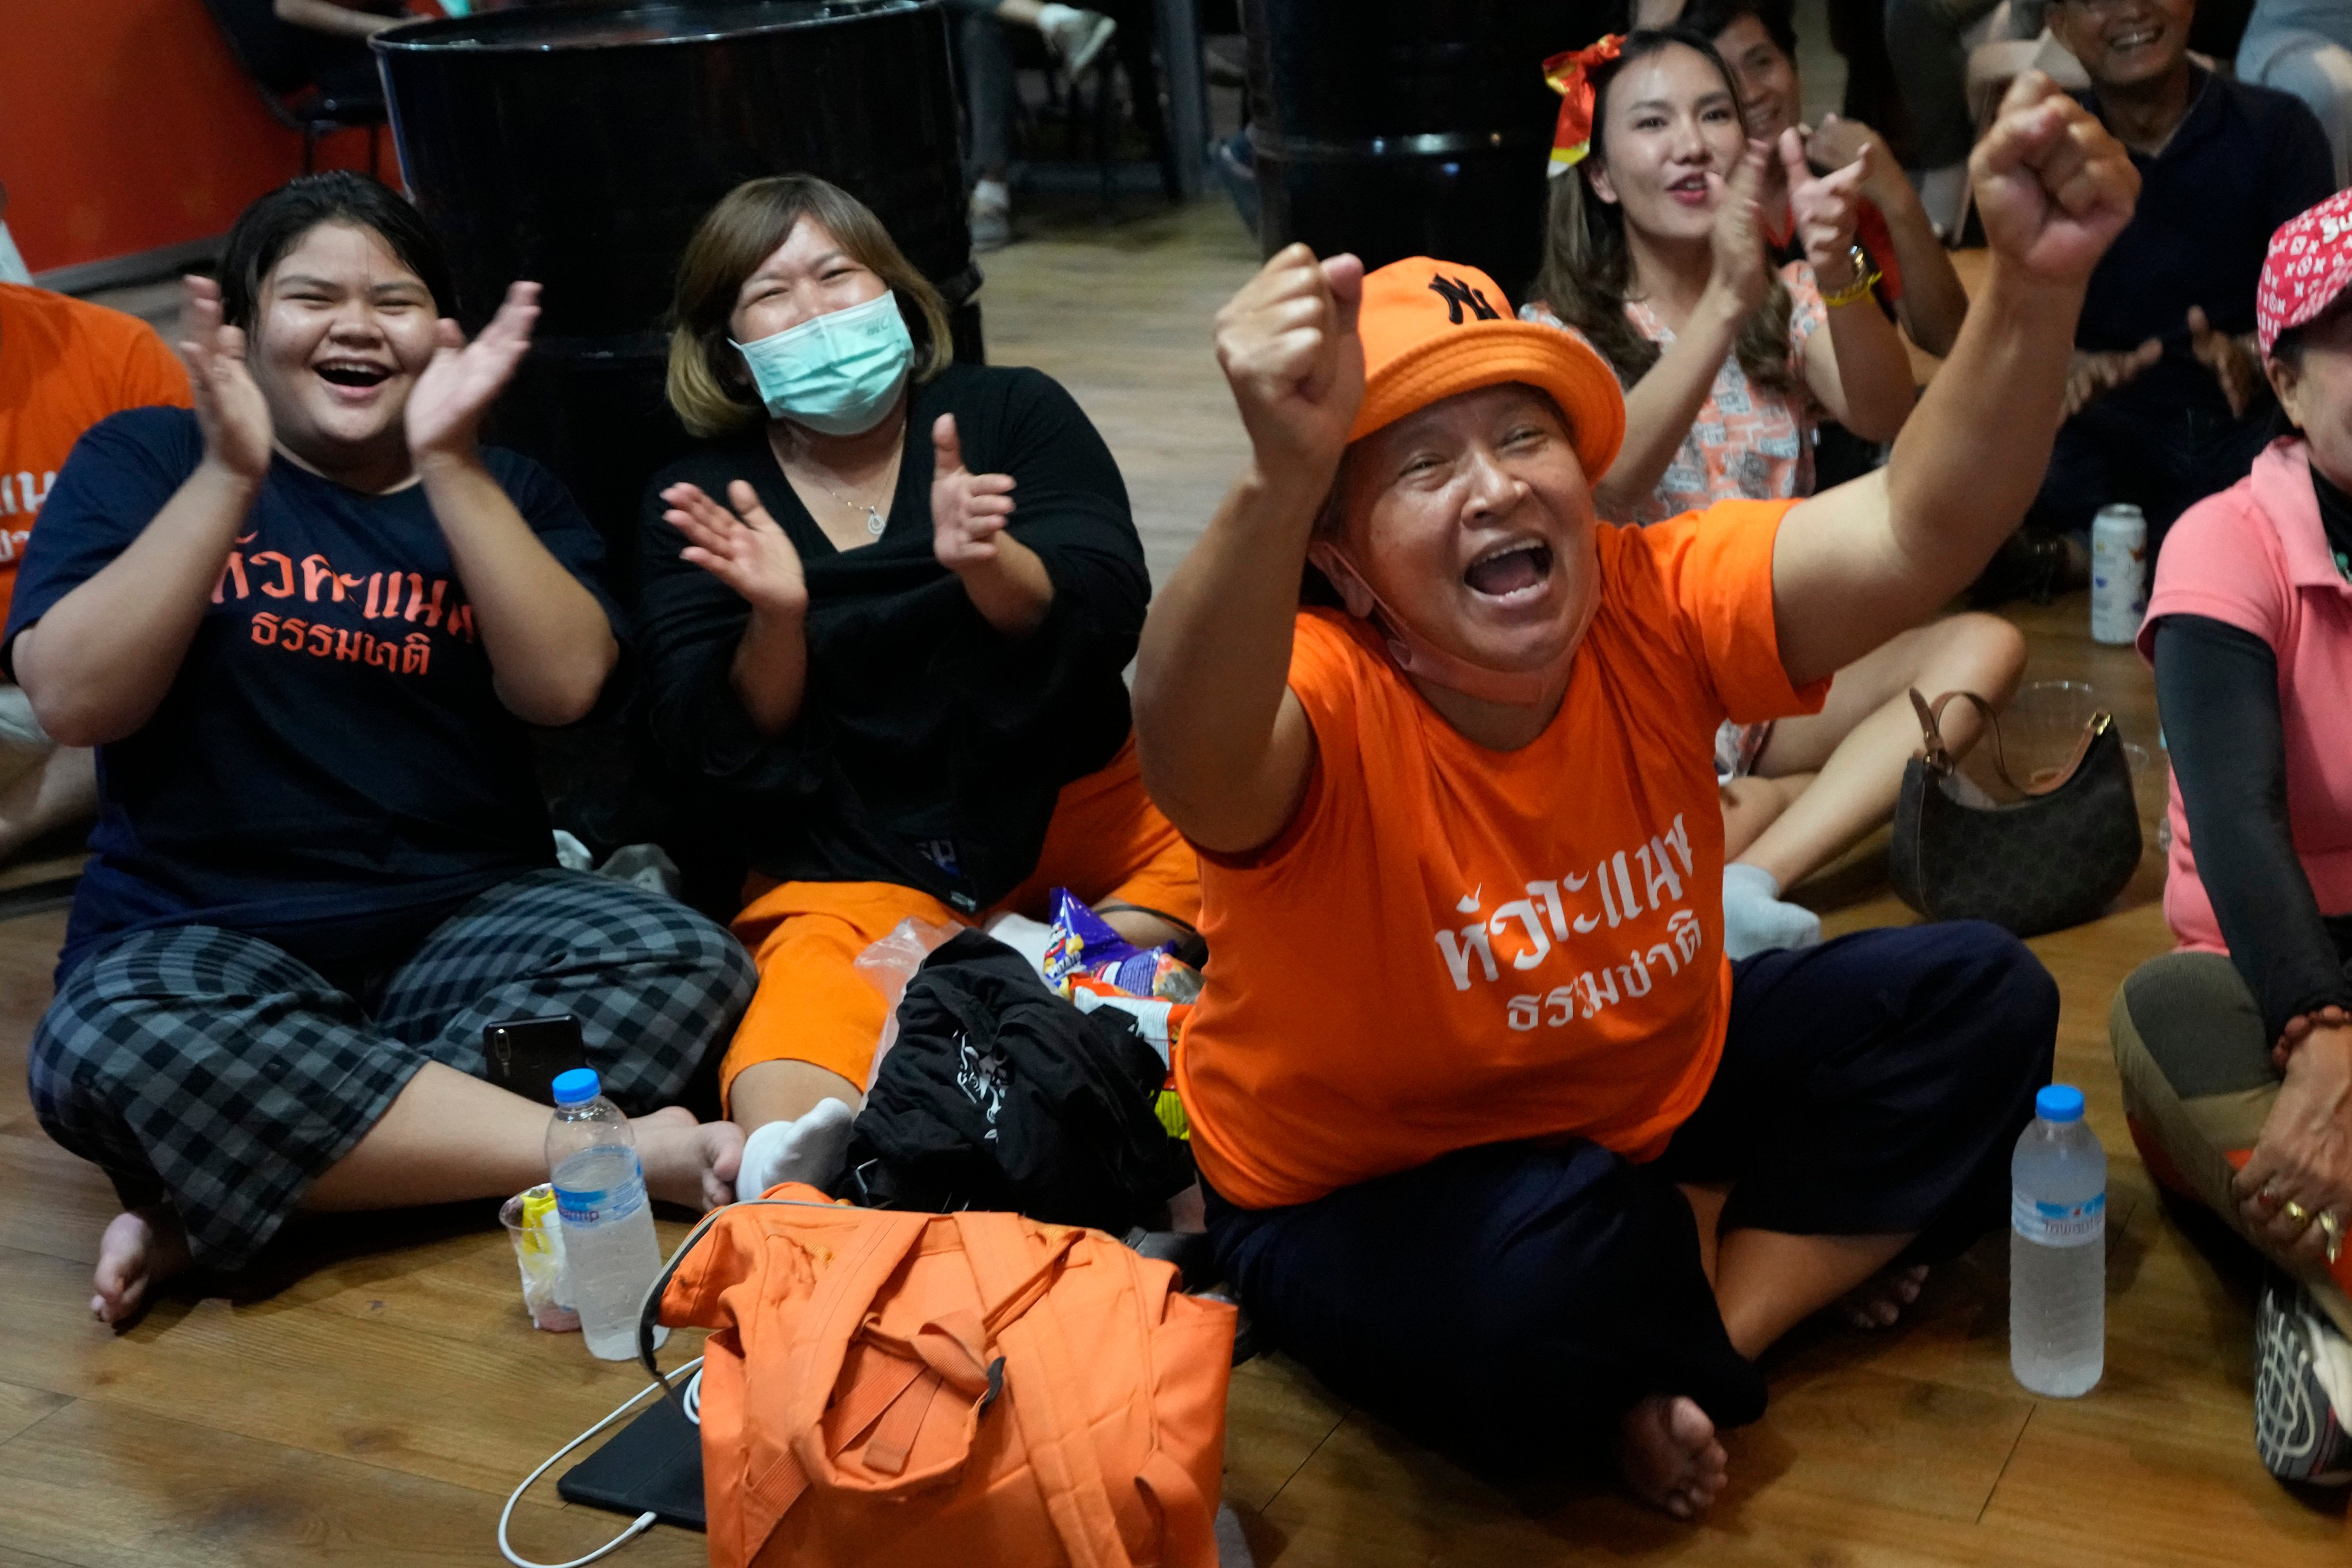 Supporters of the Move Forward Party cheer as they watch the counting of votes on television after Sunday’s election. Photo: AP